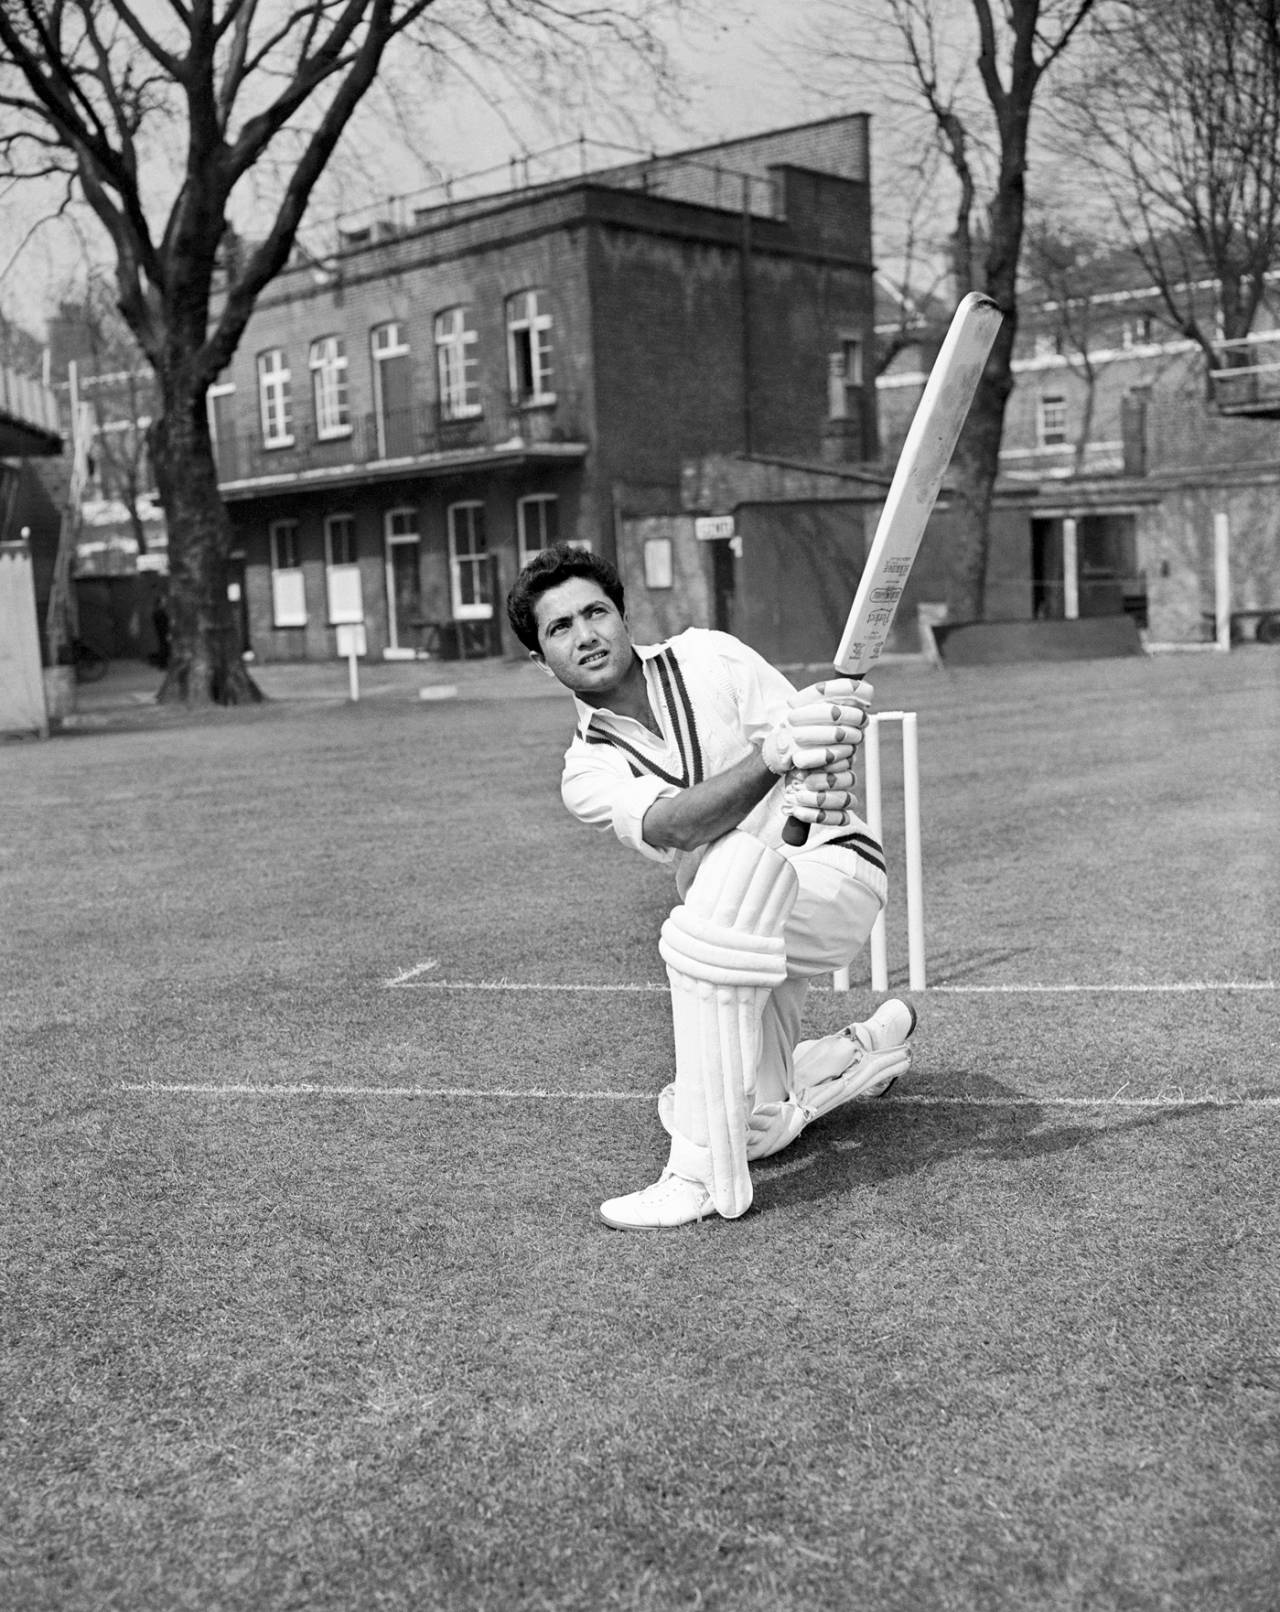 Hanif Mohammad in the Pakistan nets, Lord's, April 26, 1962